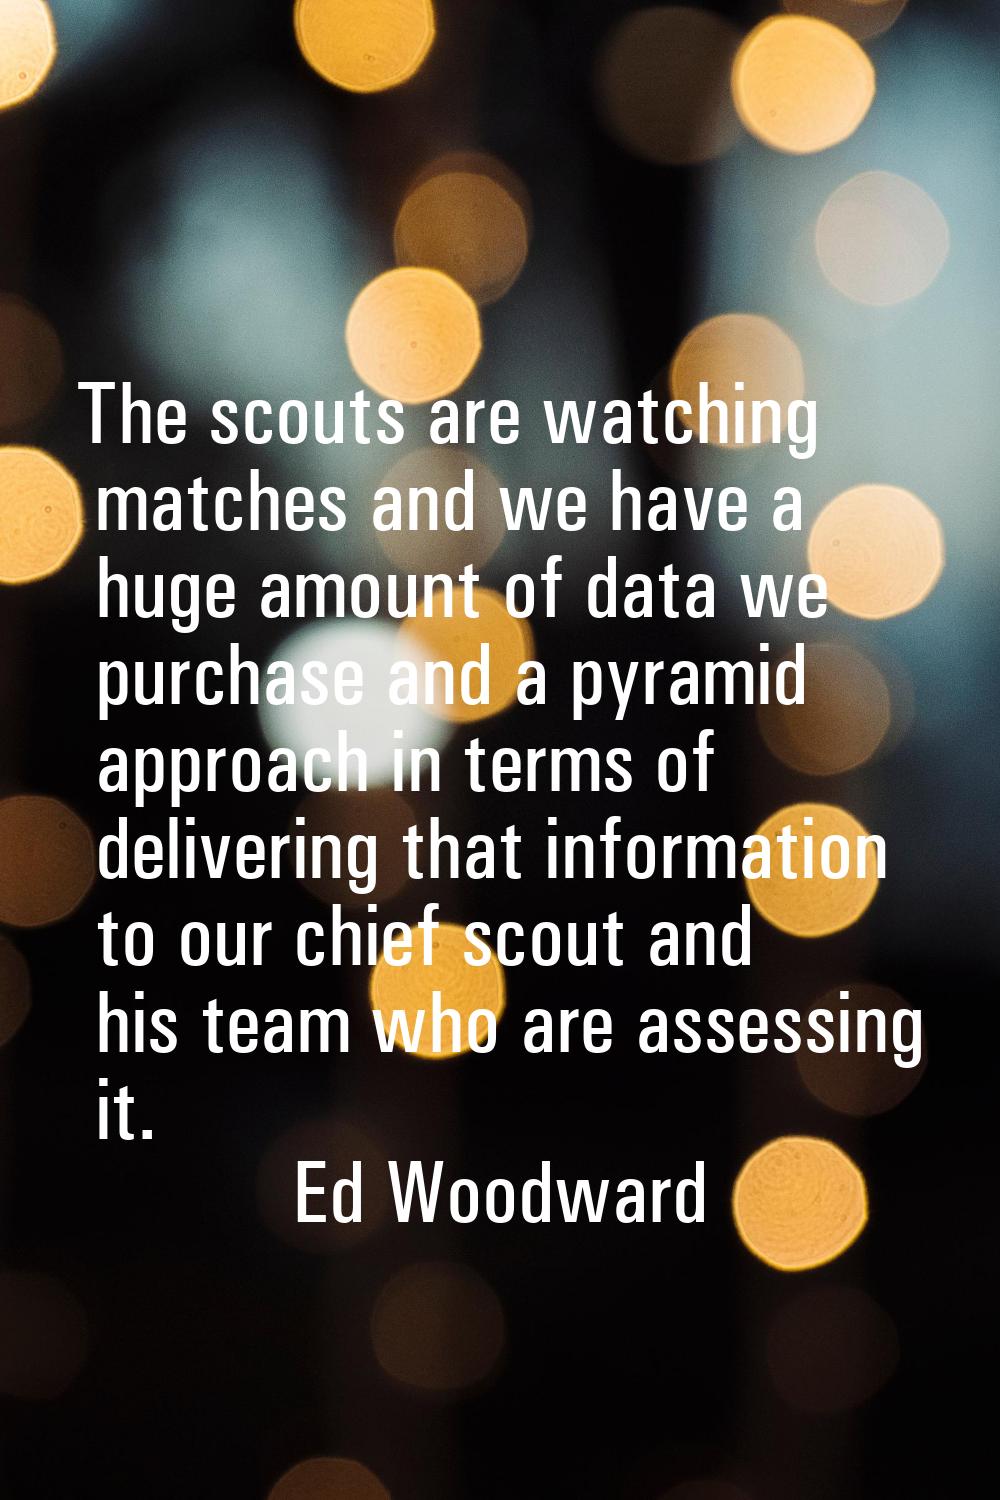 The scouts are watching matches and we have a huge amount of data we purchase and a pyramid approac